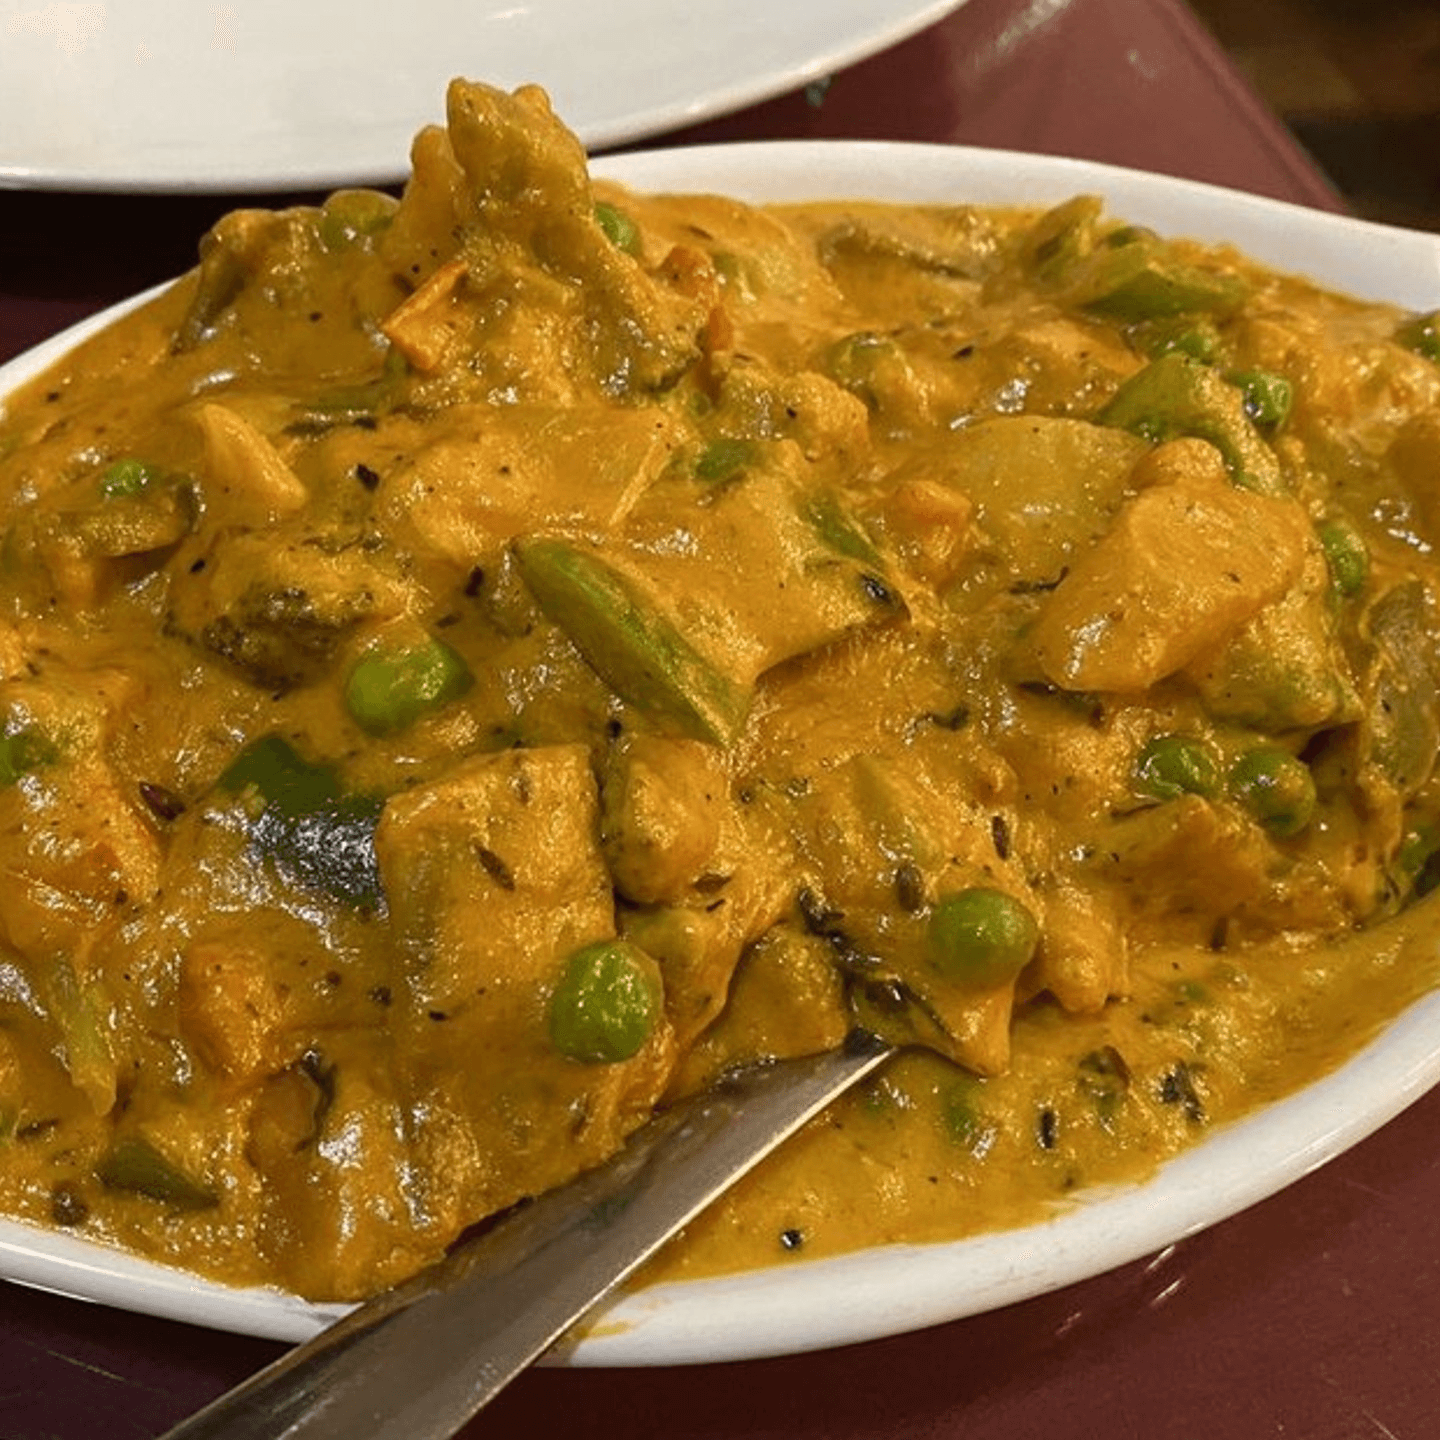 Exquisite Flavors of our Vegetable Korma